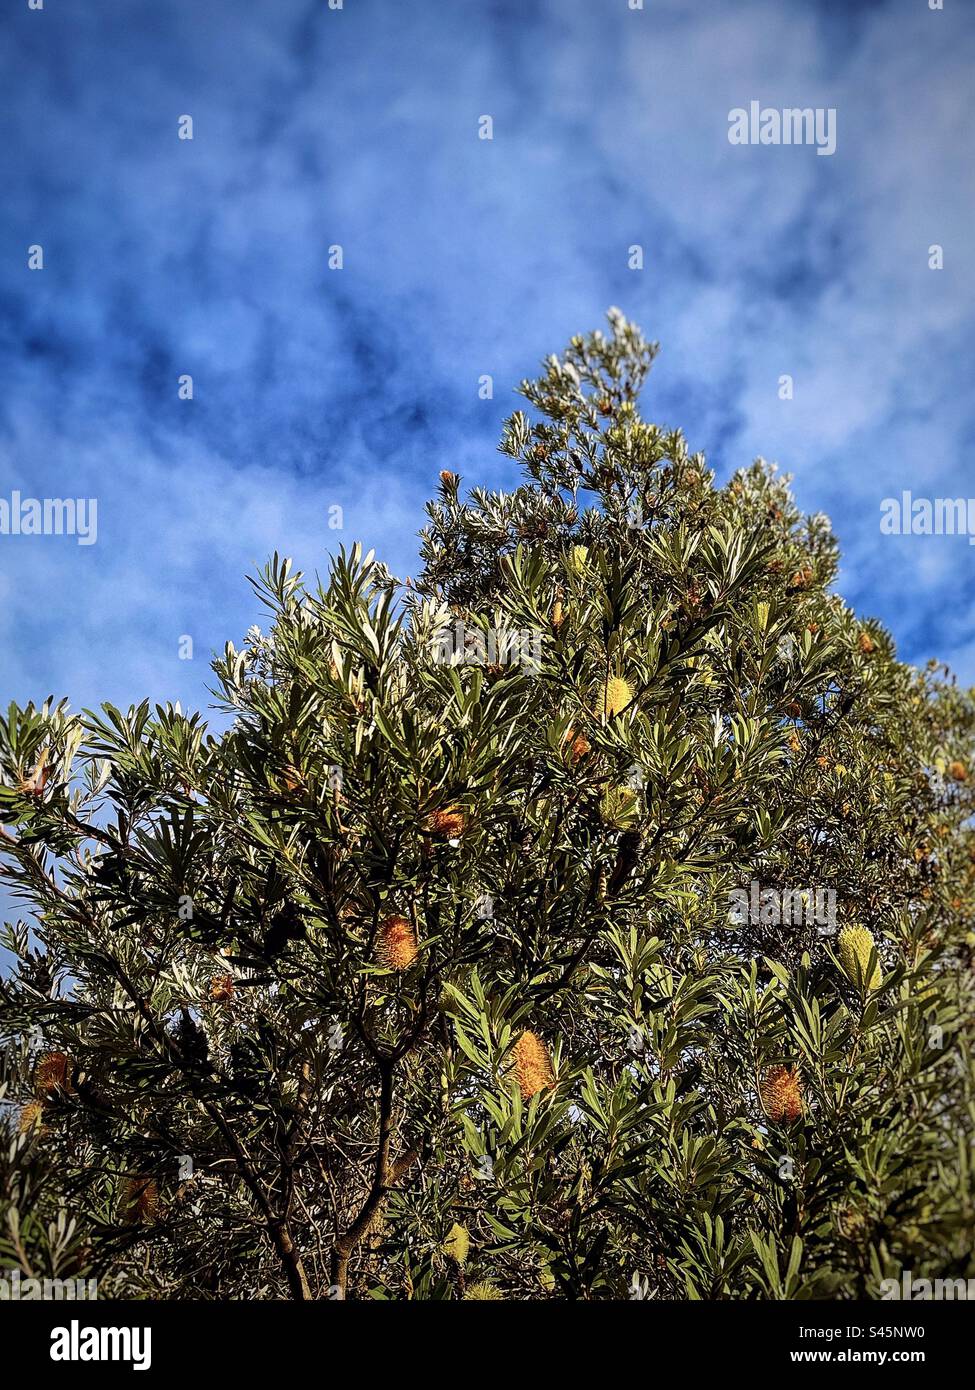 Low angle view of Banksia integrifolia or the coast banksia tree with yellow flowers on a sunny winter’s day against cloudy blue sky. Australian native bush flora. Stock Photo